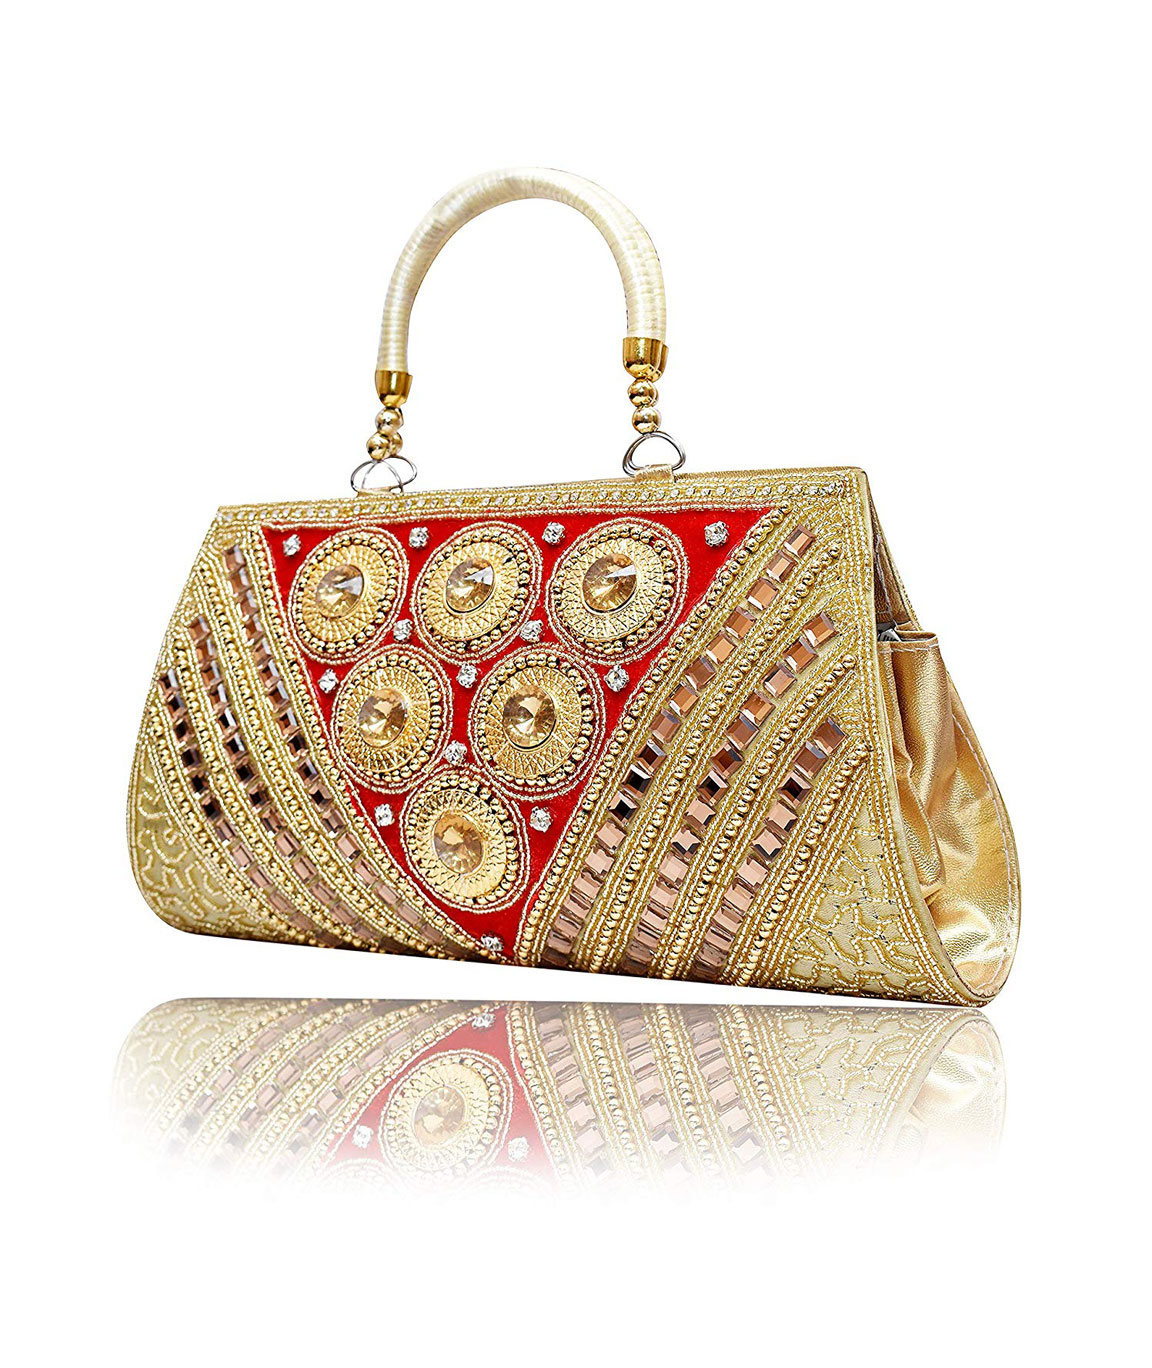 Buy Golden Beaded Clutch With Tear Drop & Matching Pair of Sandals